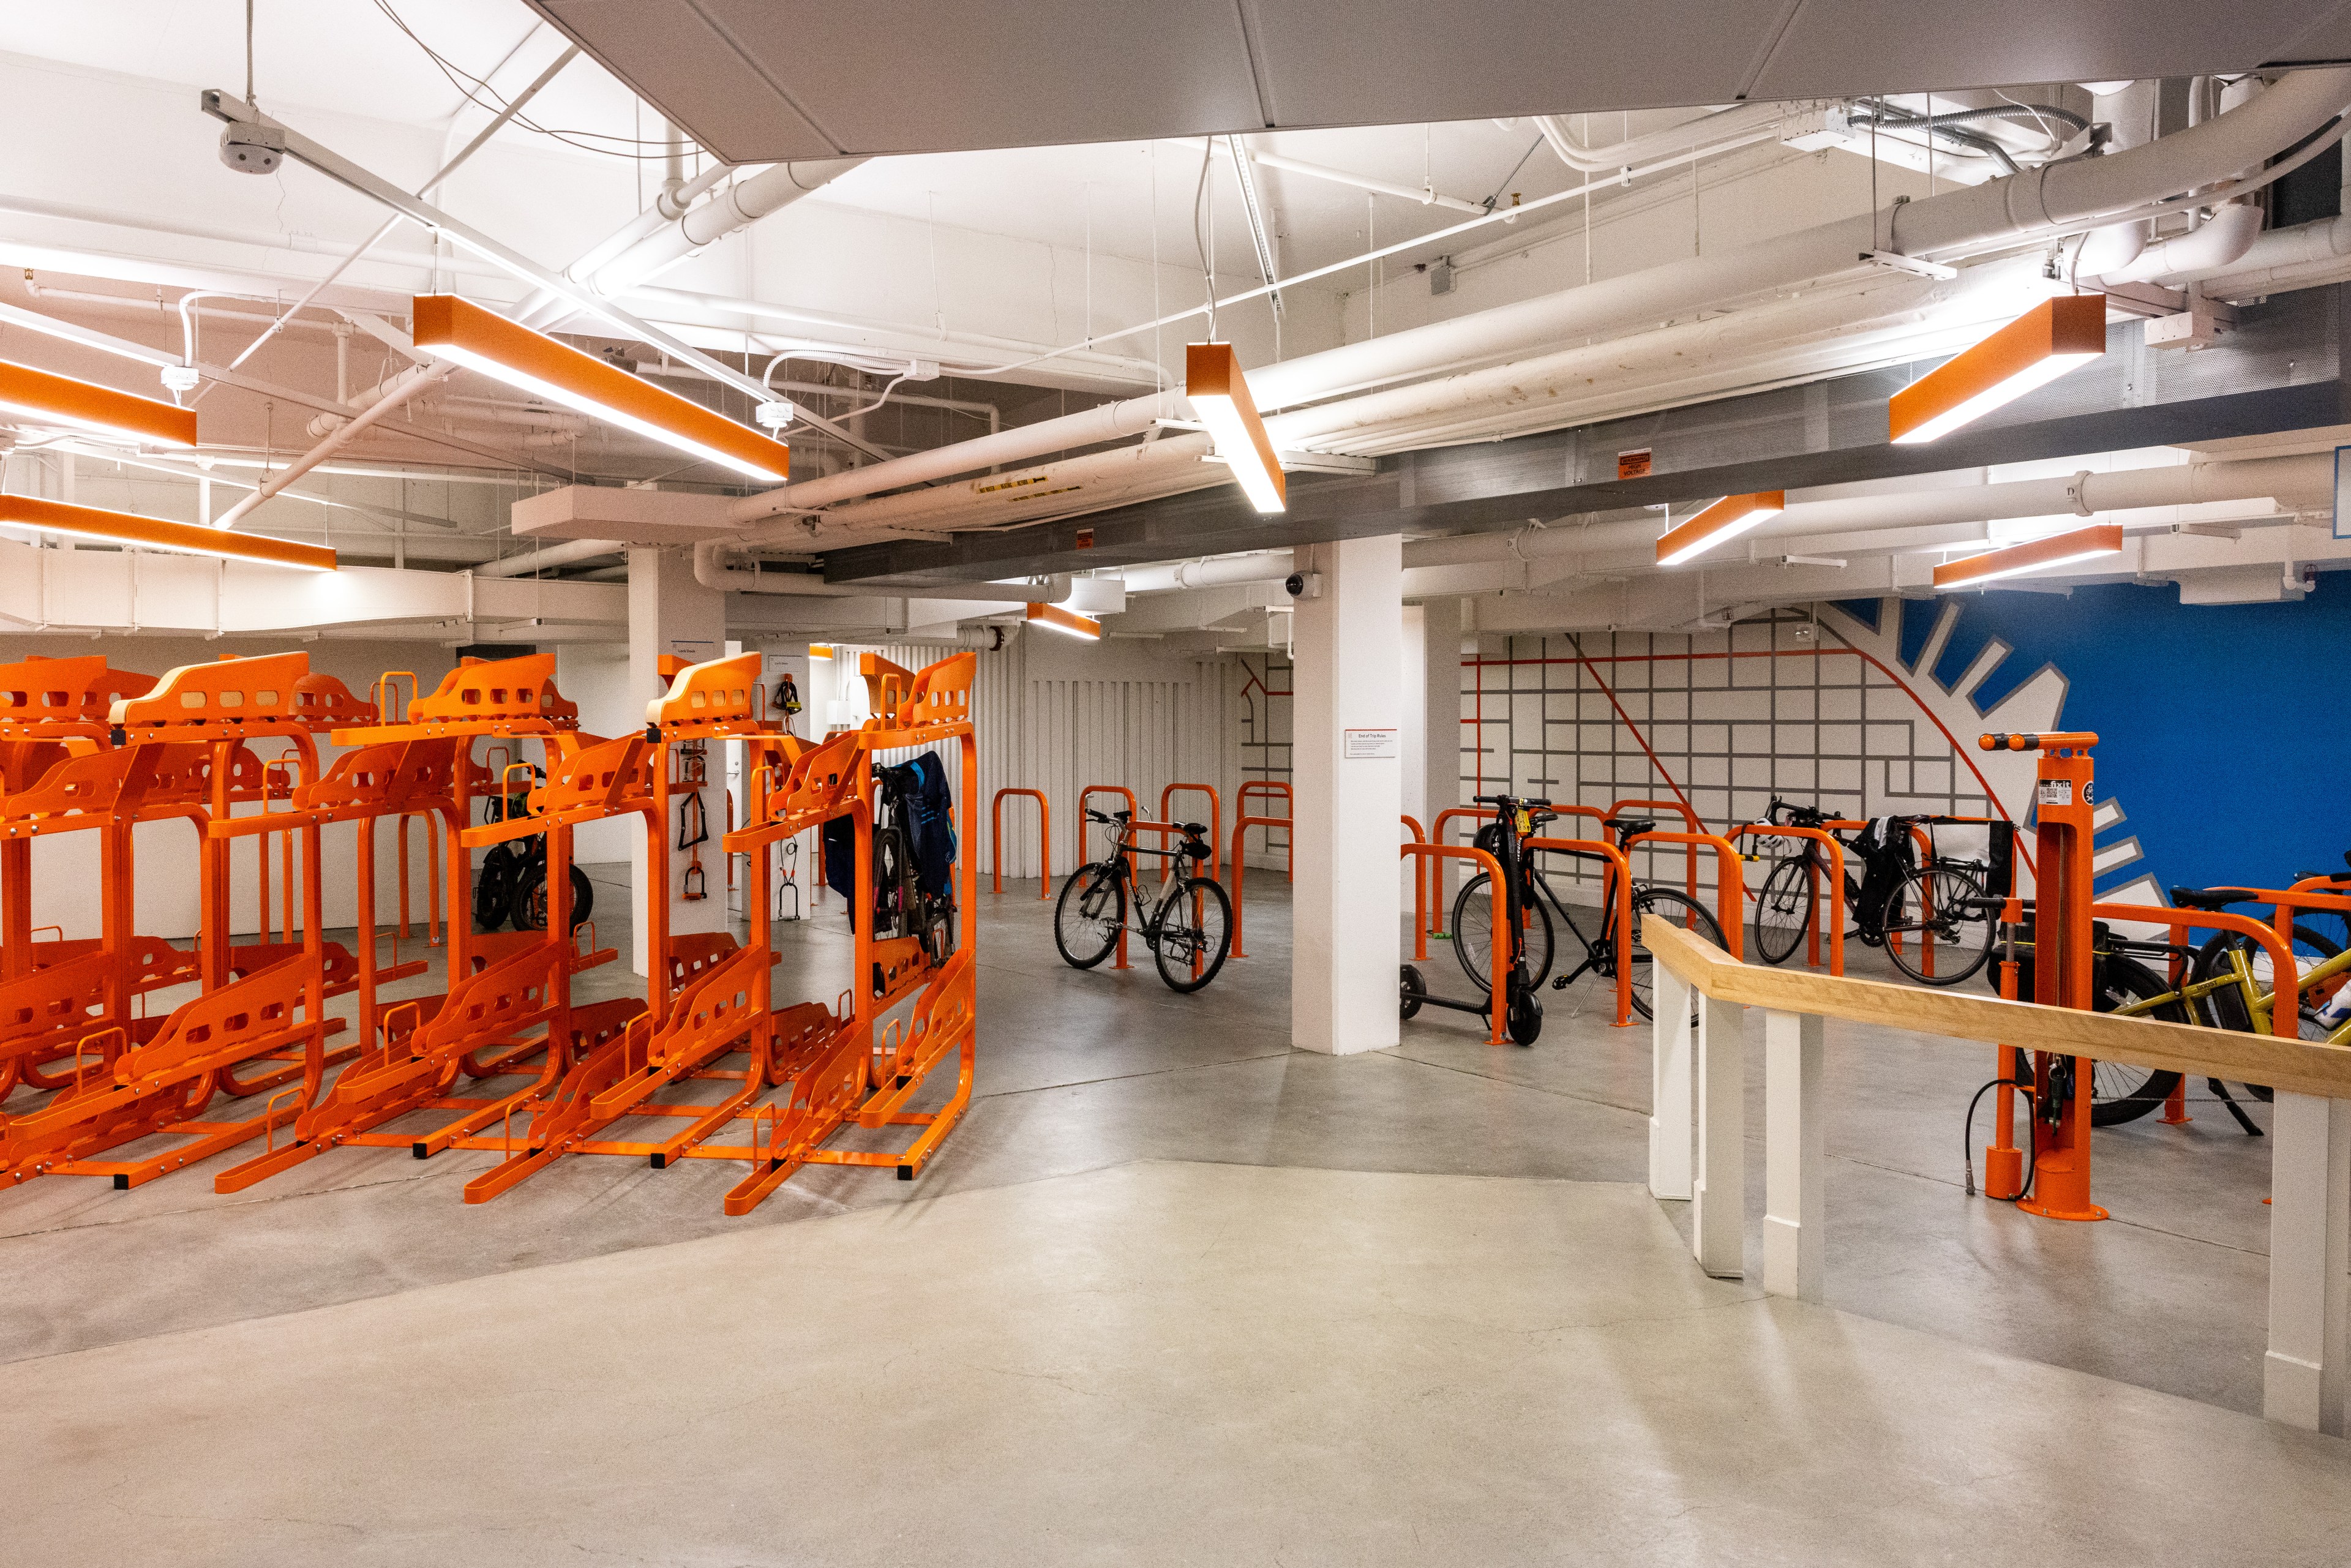 The image shows an indoor bicycle storage area with bright orange bike racks and hooks. Several bicycles are parked, and the space has a clean, modern design.